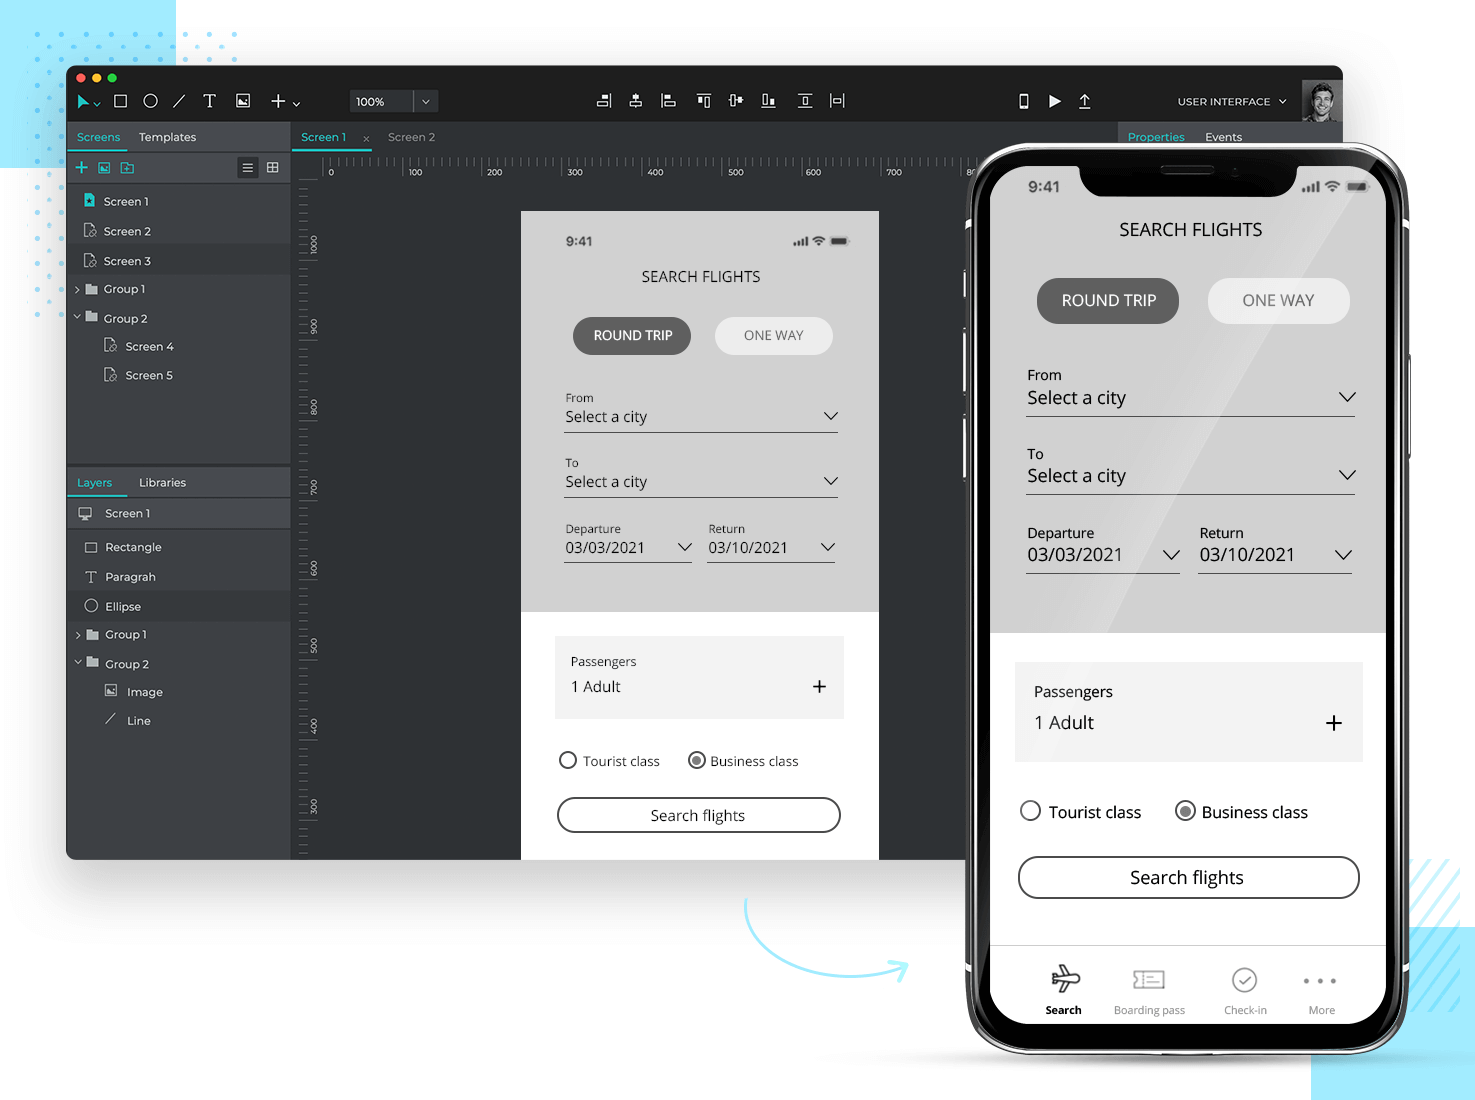 Prototype presentation technique - ensure previewing possible on mobile devices